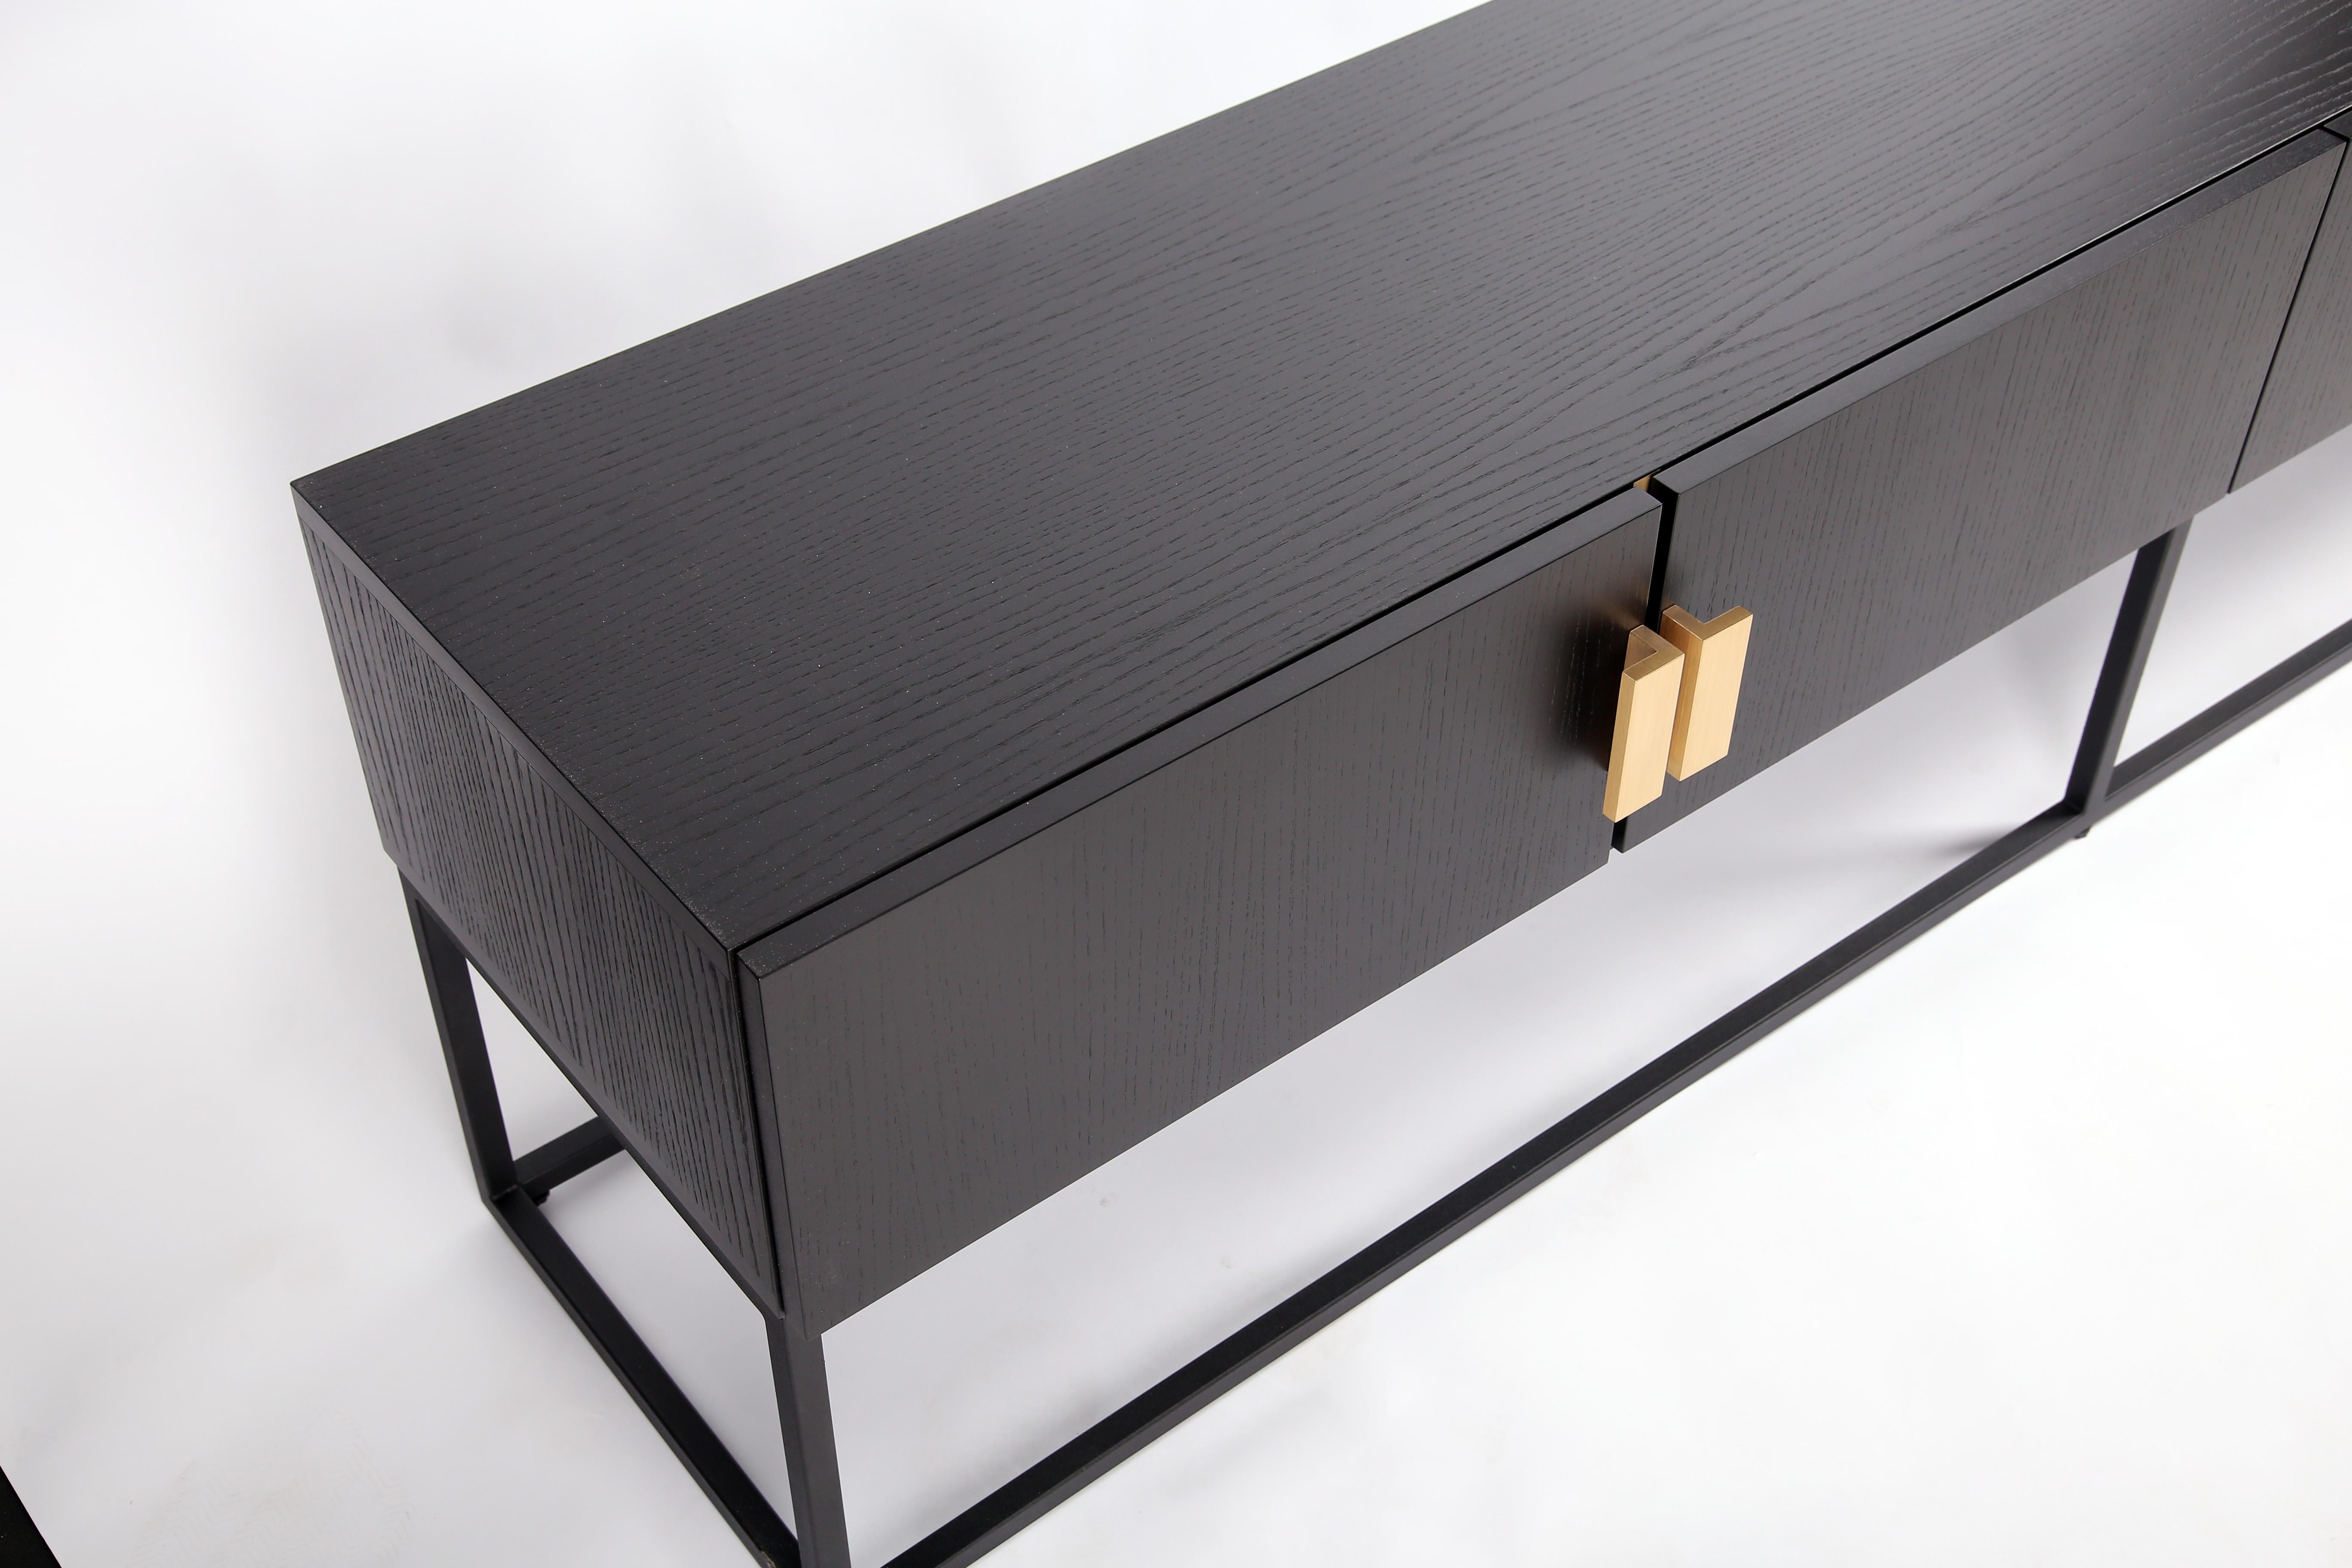 Perfect for any home, the Norse console provides ample amounts of storage in style. With a sleek and sophisticated design, the chic Norse has a gorgeous, black ash veneer that beautifully contrasts with its brushed gold handles and black steel legs.